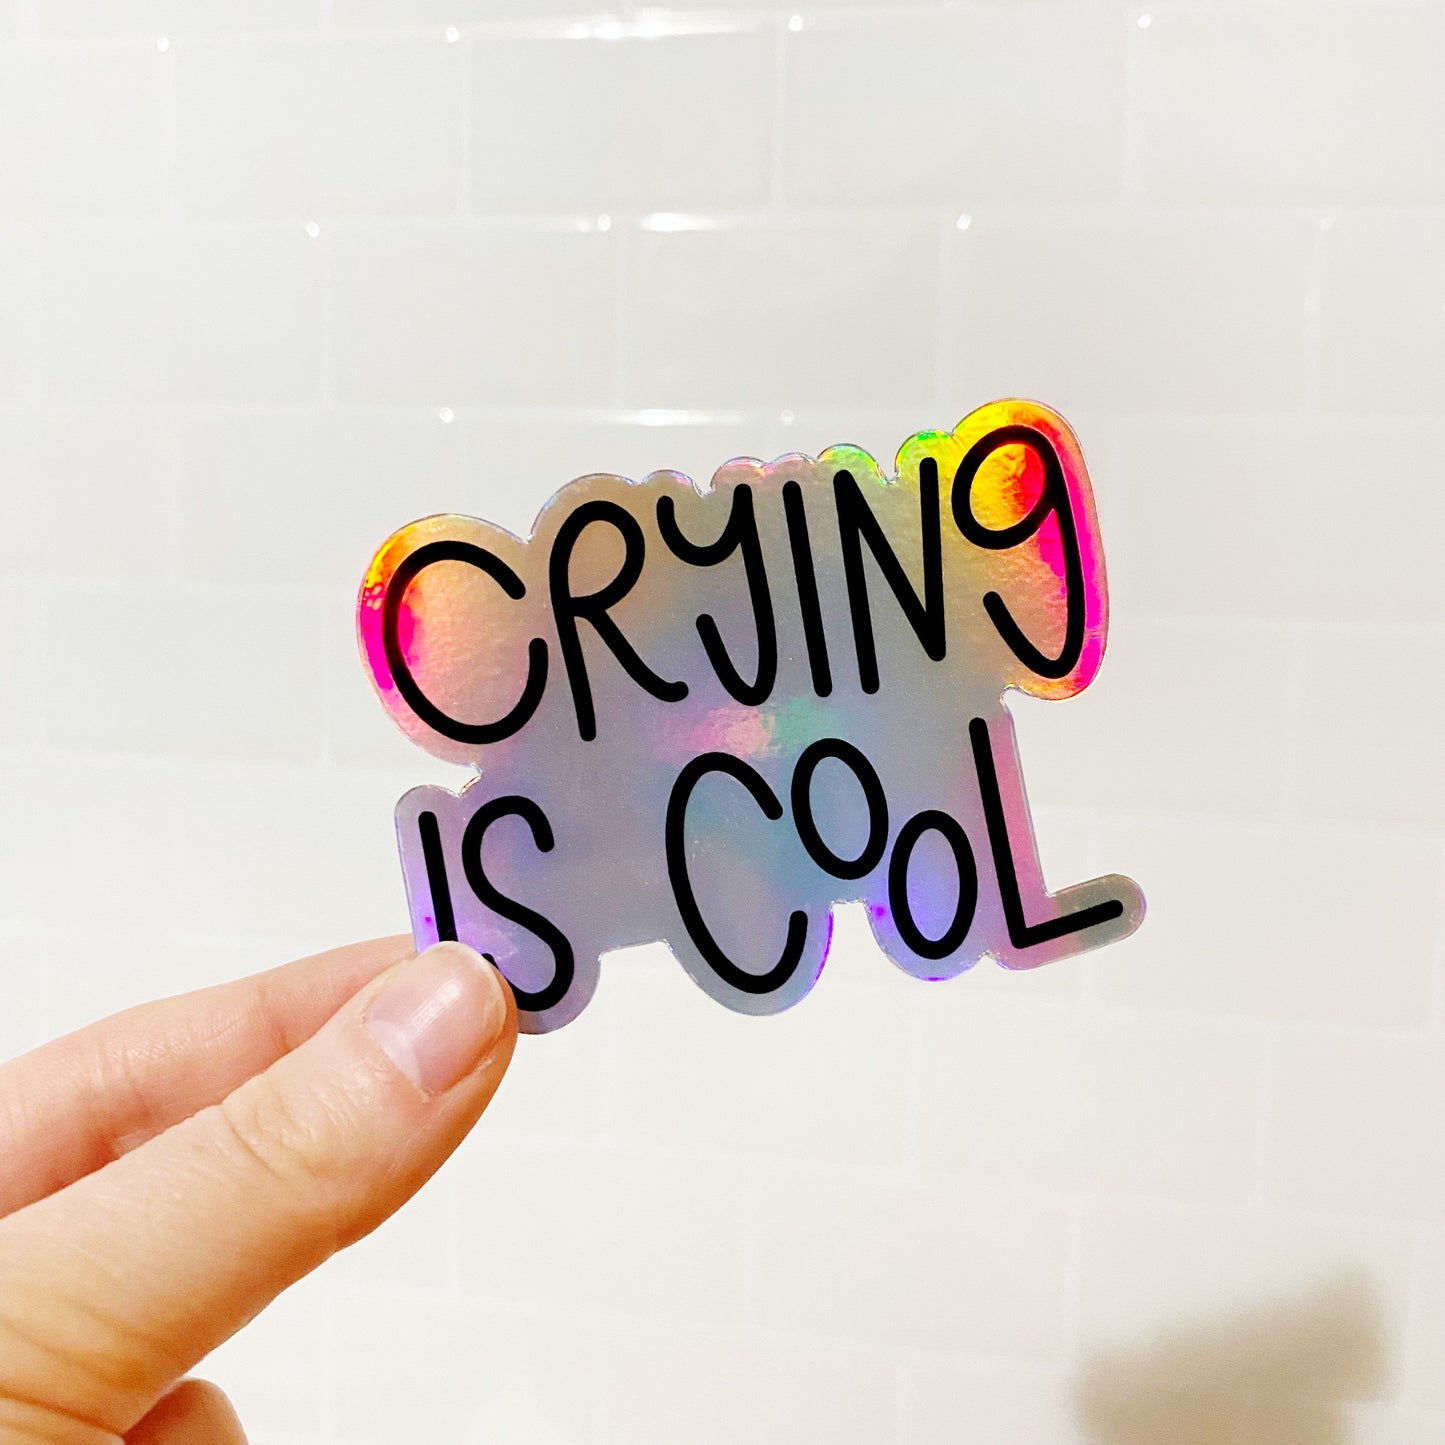 Crying is Cool Holographic Sticker